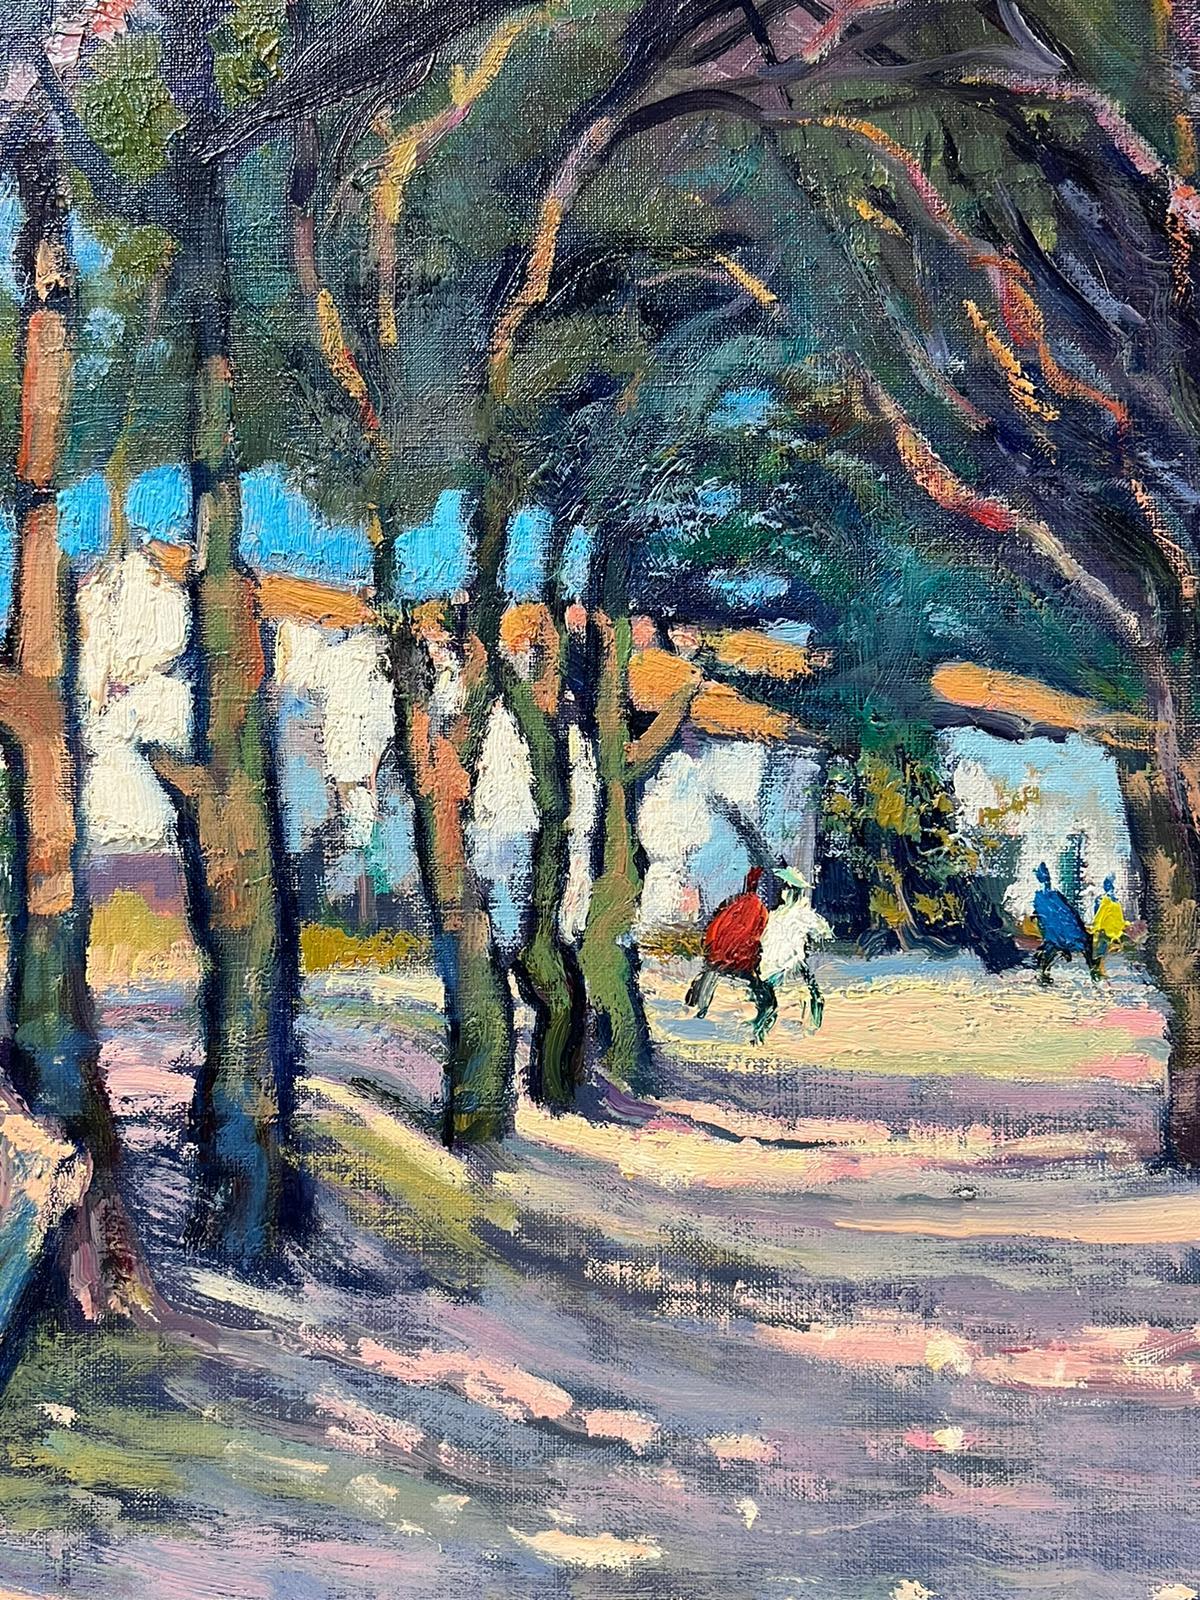 Artist/ School: Guy Benard (French b.1928) signed lower corner. Painter from Rouen, Normandy, exhibited throughout France. 

Title: Agde (South of France)

Medium: signed oil on canvas, unframed and inscribed verso

size: 28.75 x 21.5